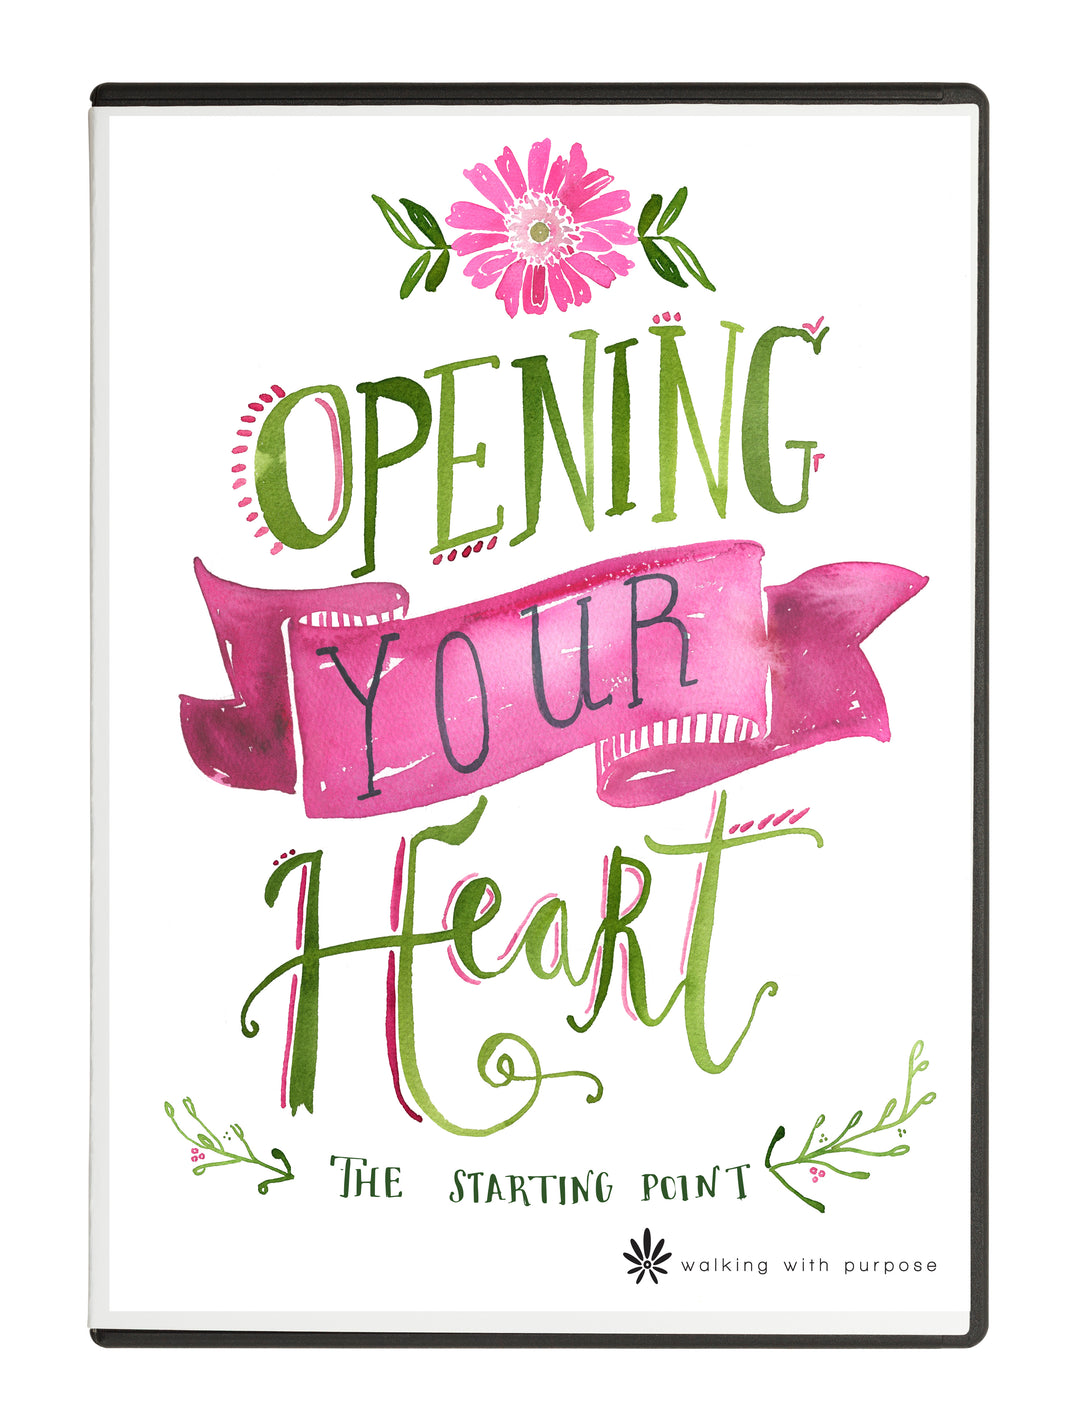 Opening Your Heart DVD cover